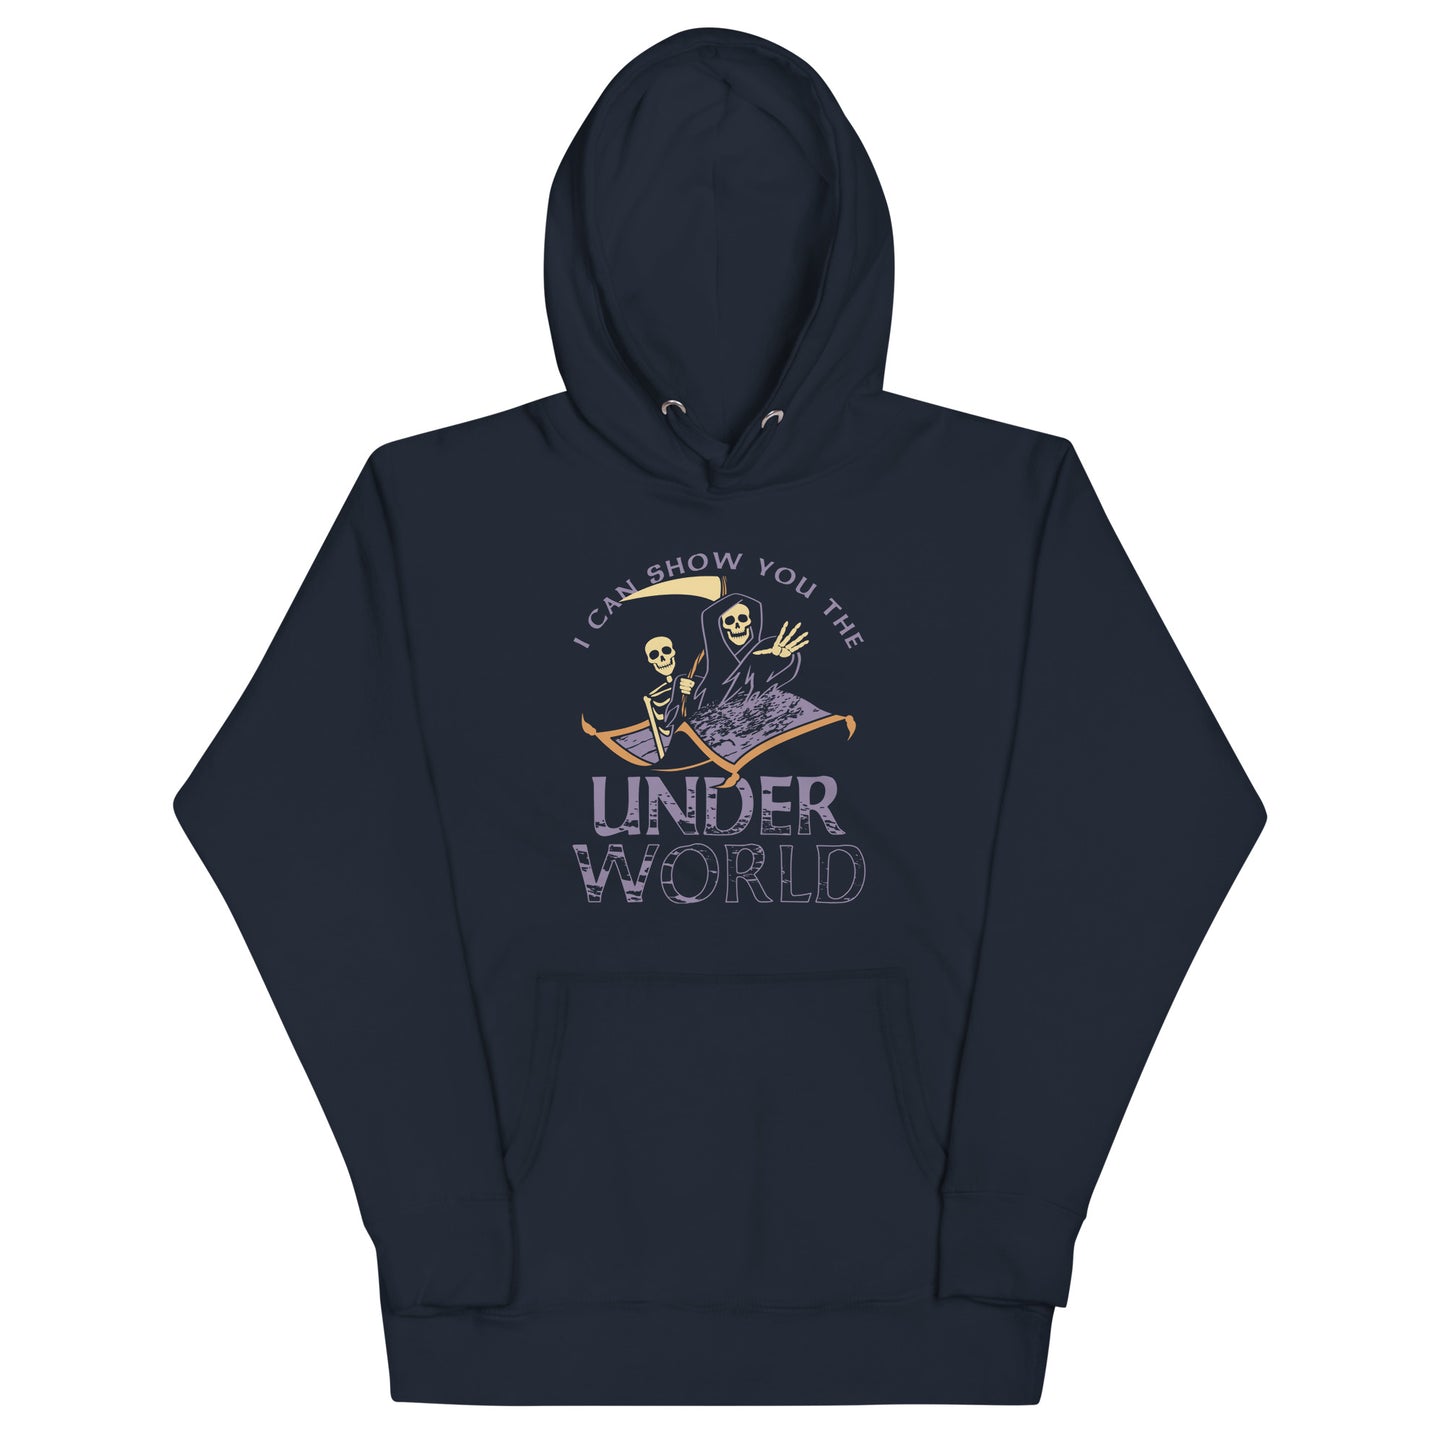 I Can Show You The Under World Unisex Hoodie